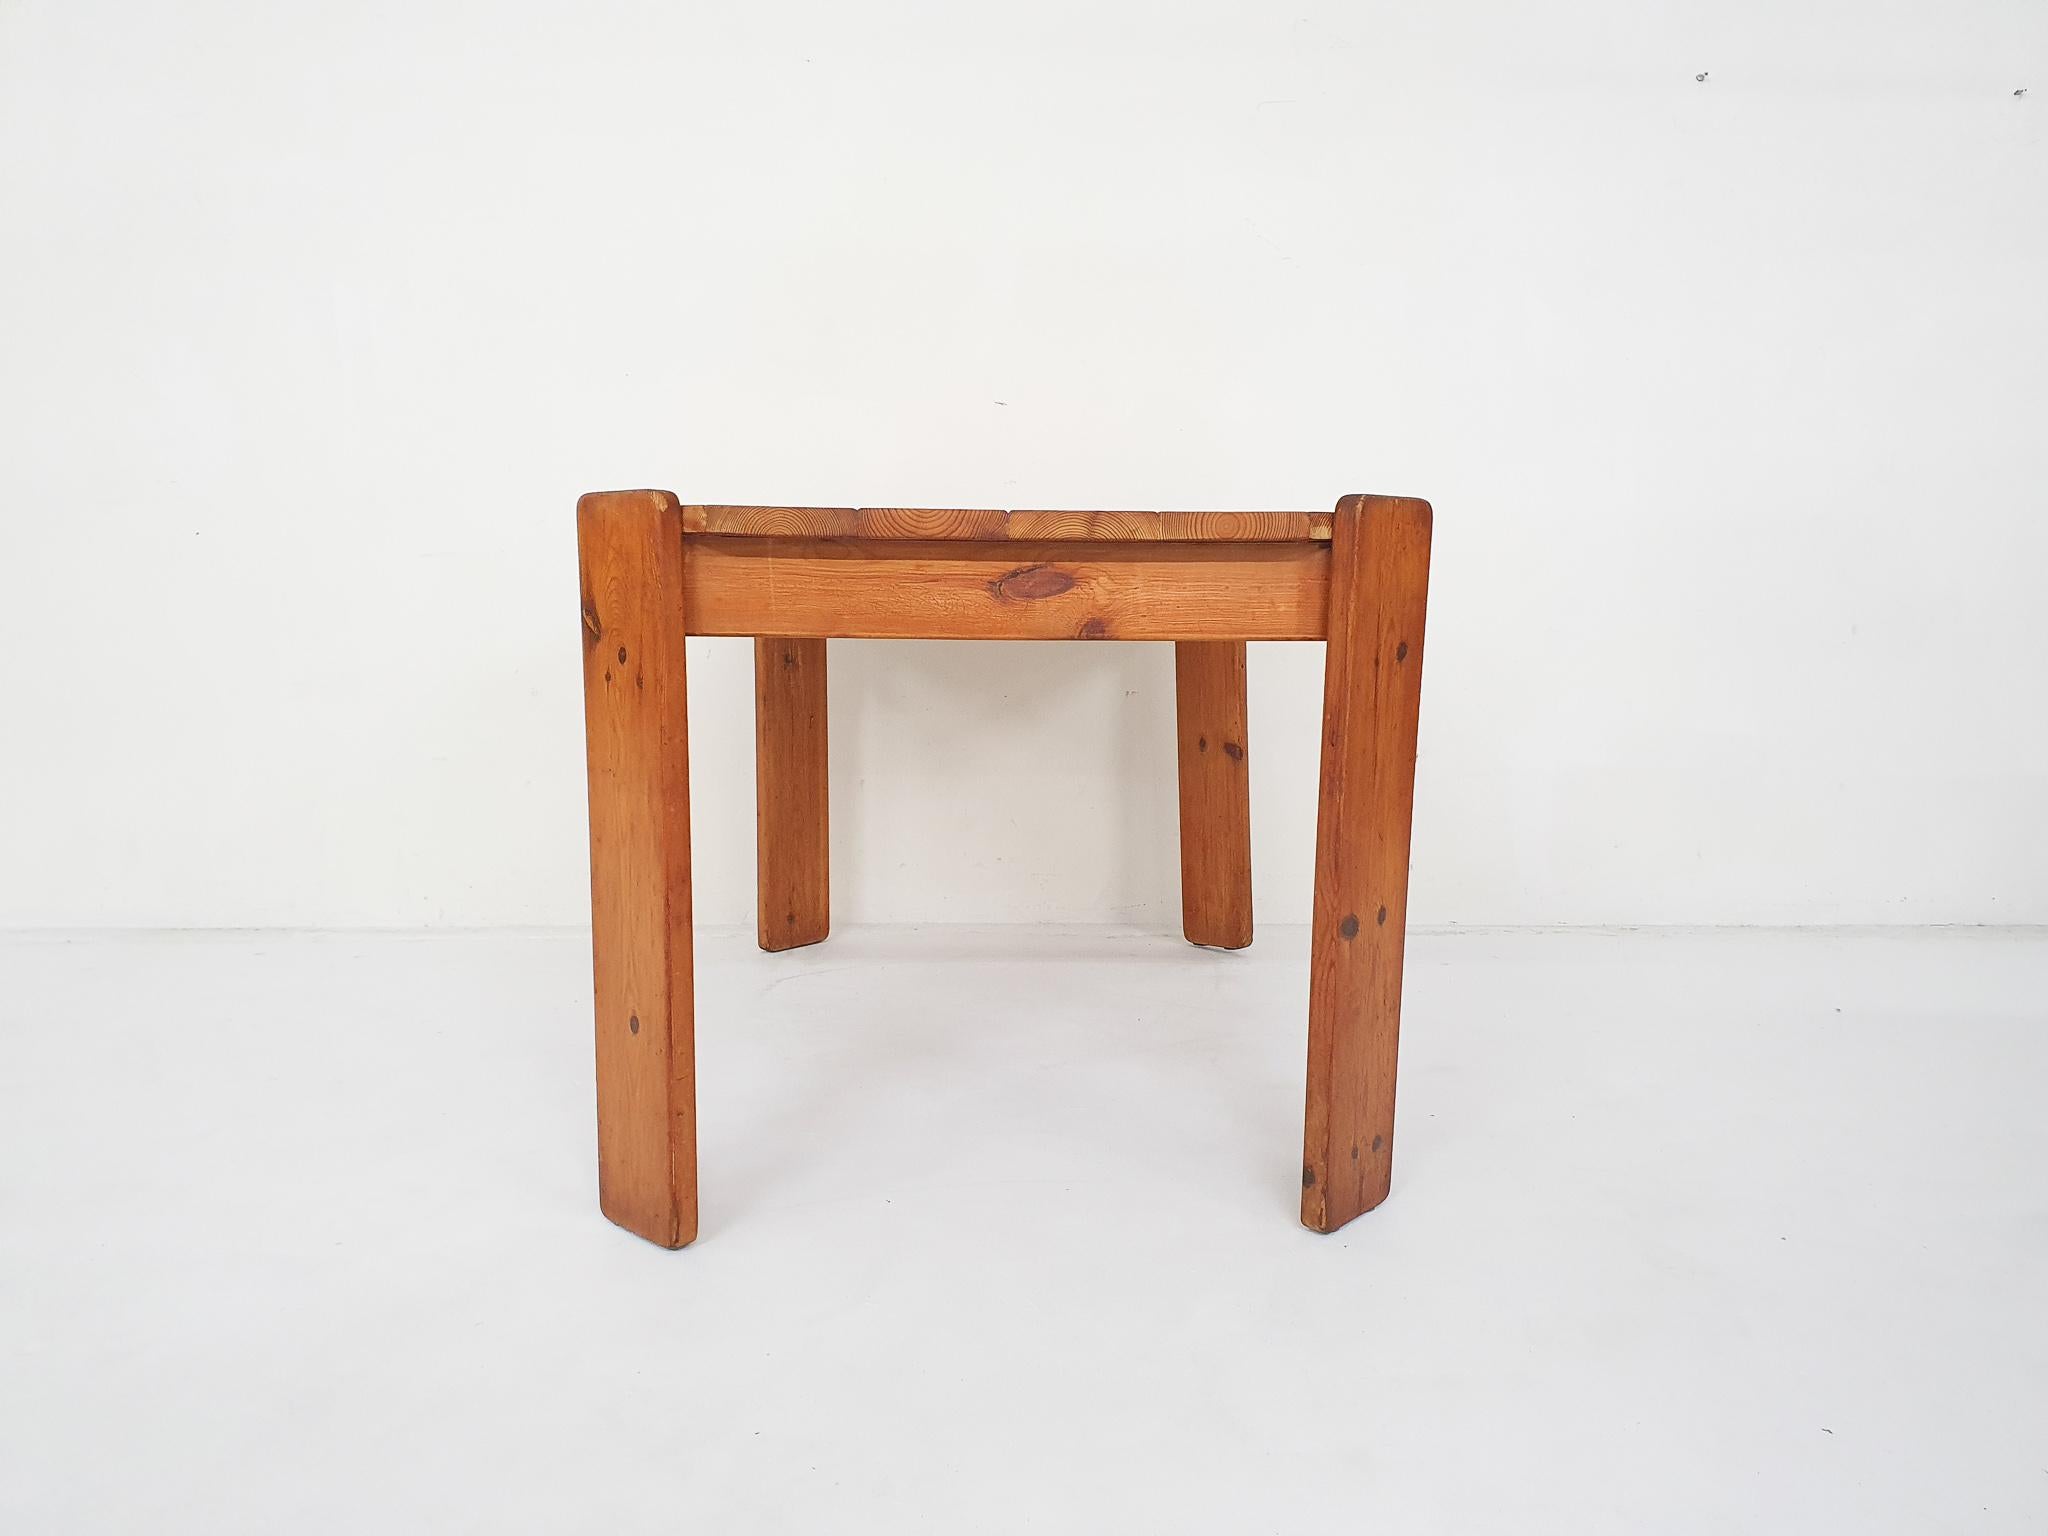 Pinewood dining table attrb. to Ate van Apeldoorn, The Netherlands 1970's In Good Condition For Sale In Amsterdam, NL